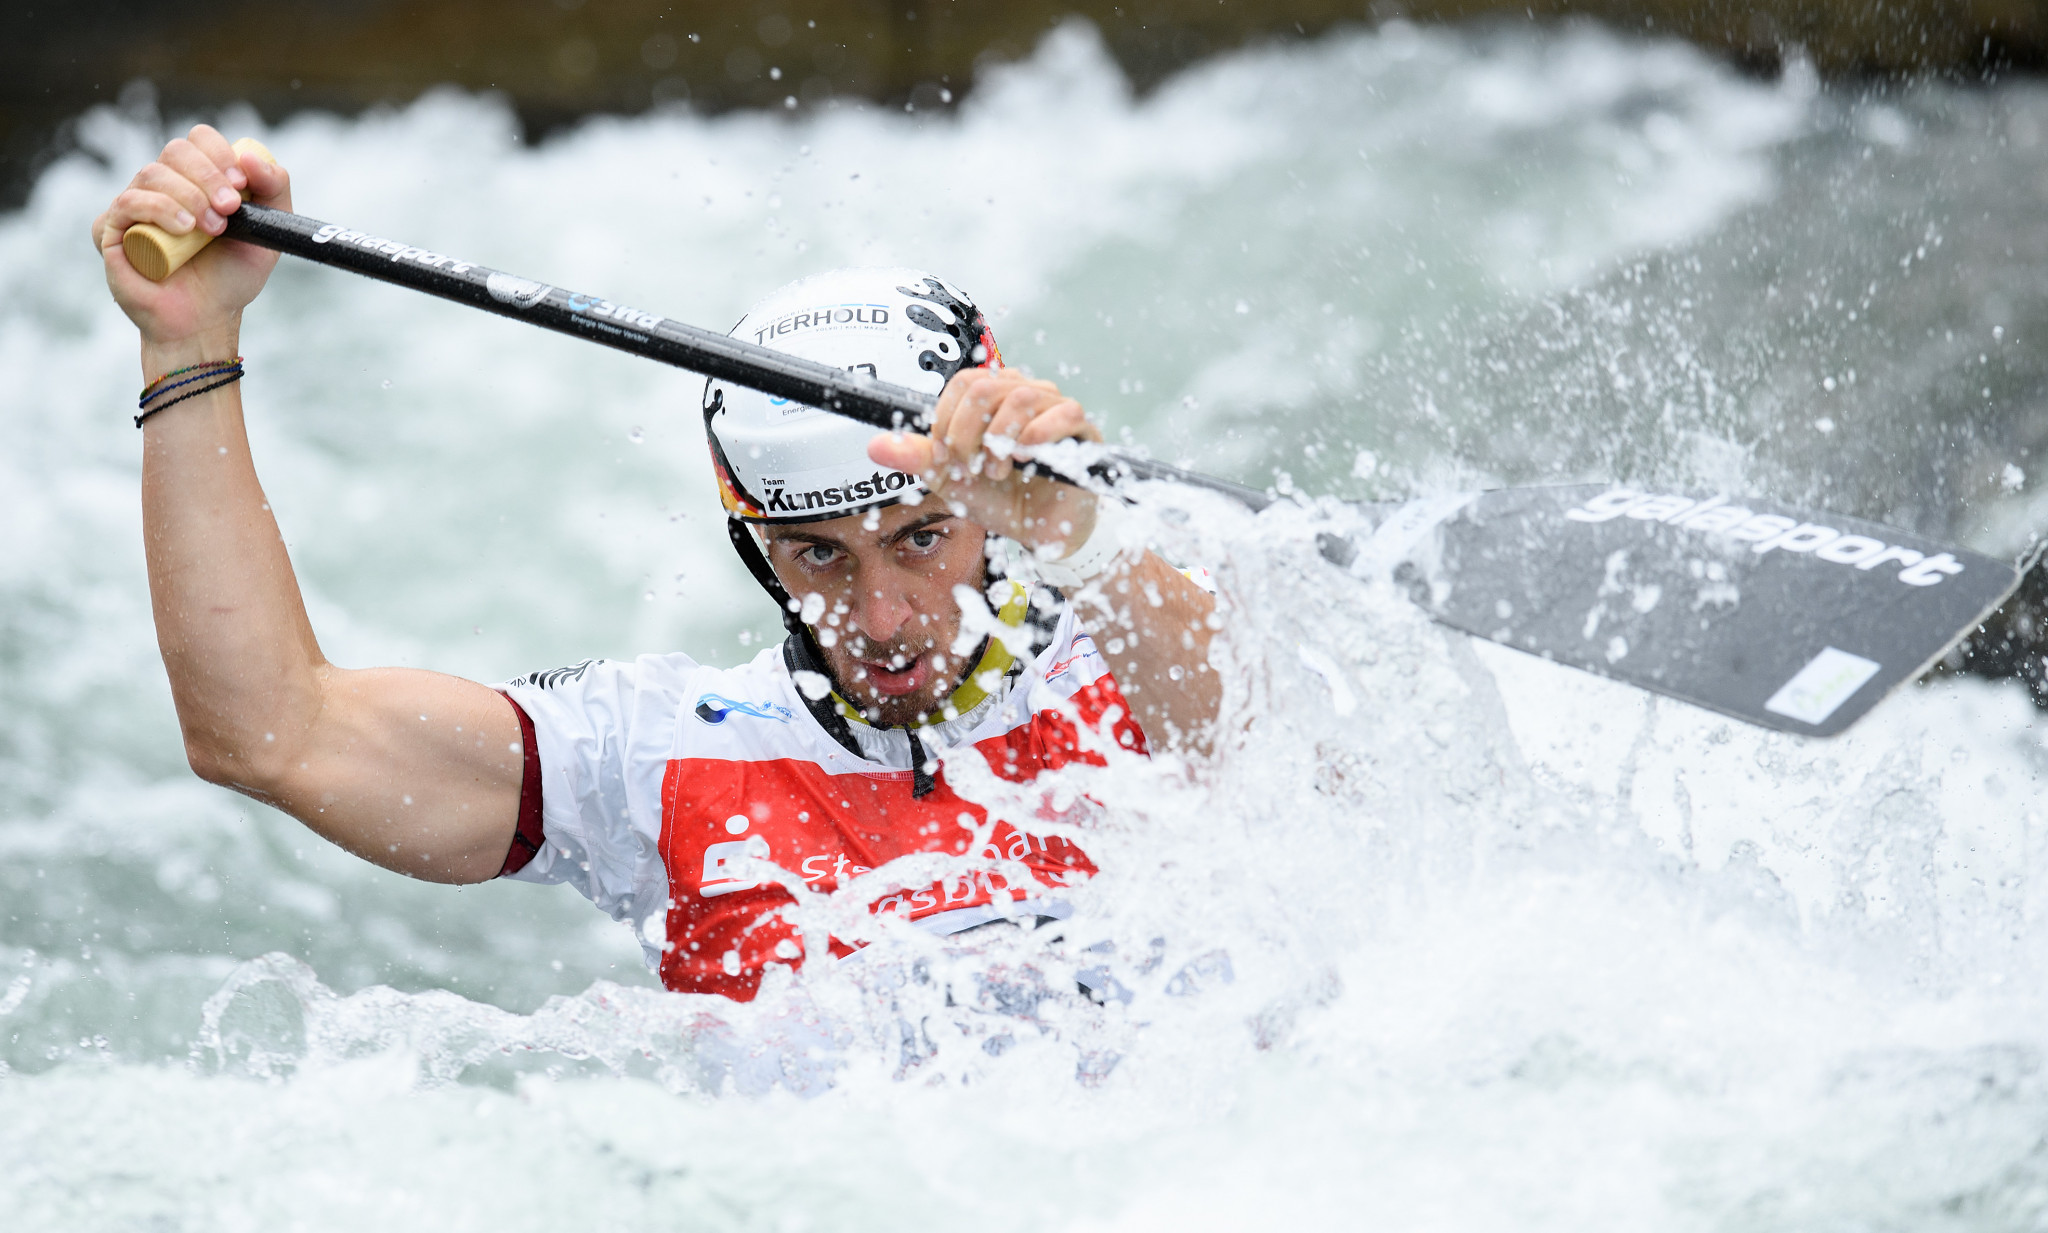 Augsburg will host the 2022 Canoe Slalom World Championships ©Getty Images